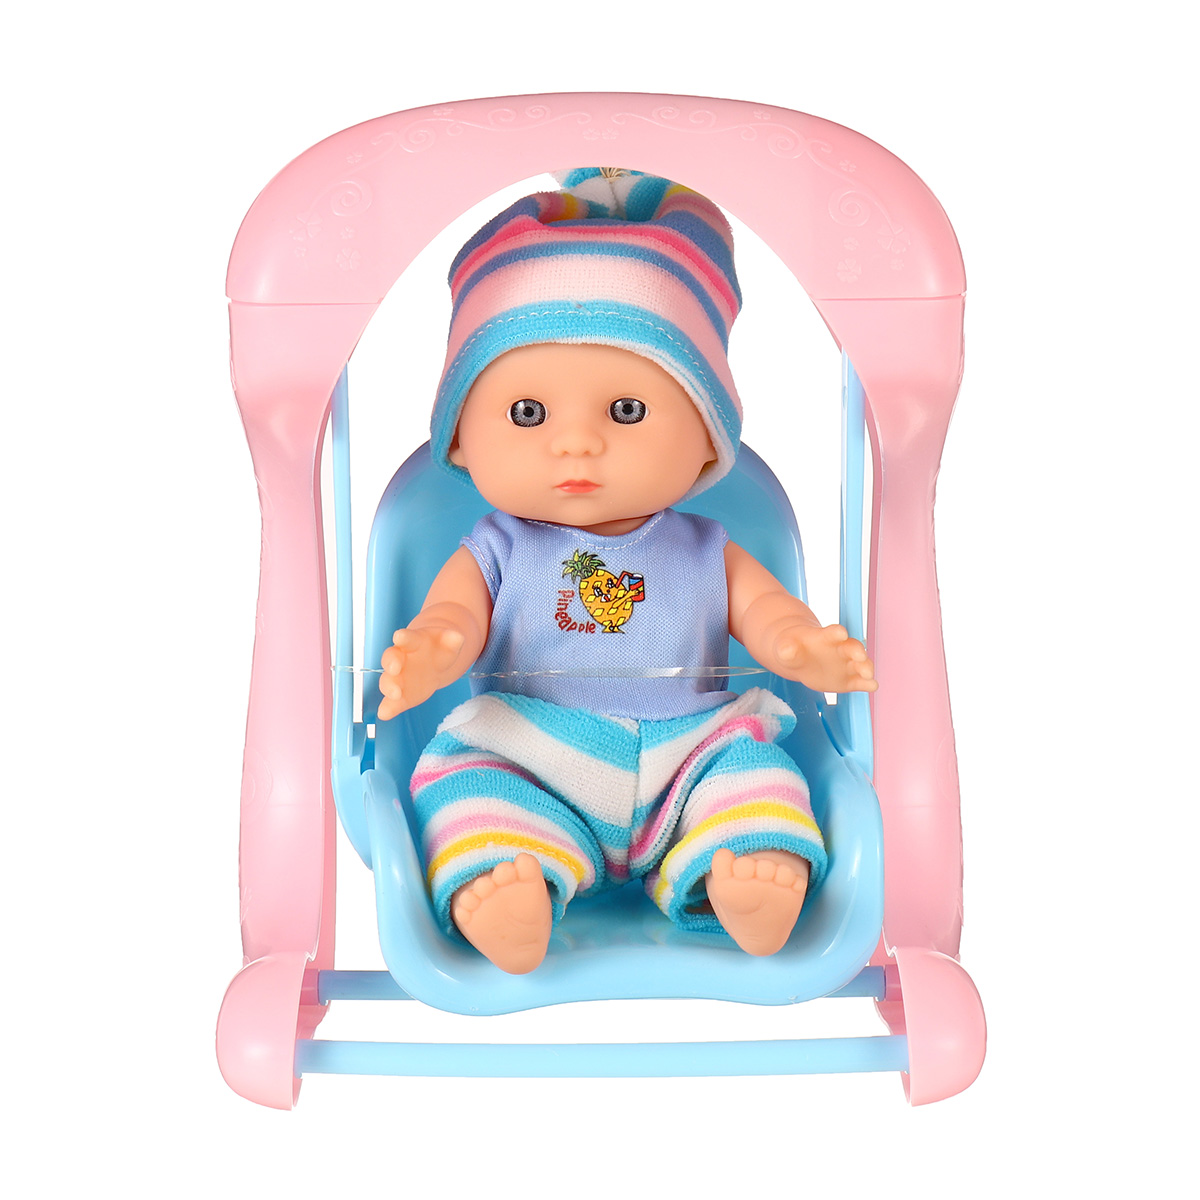 Simulation-Baby-3D-Creative-Cute-Doll-Play-House-Toy-Doll-Vinyl-Doll-Gift-1818655-22